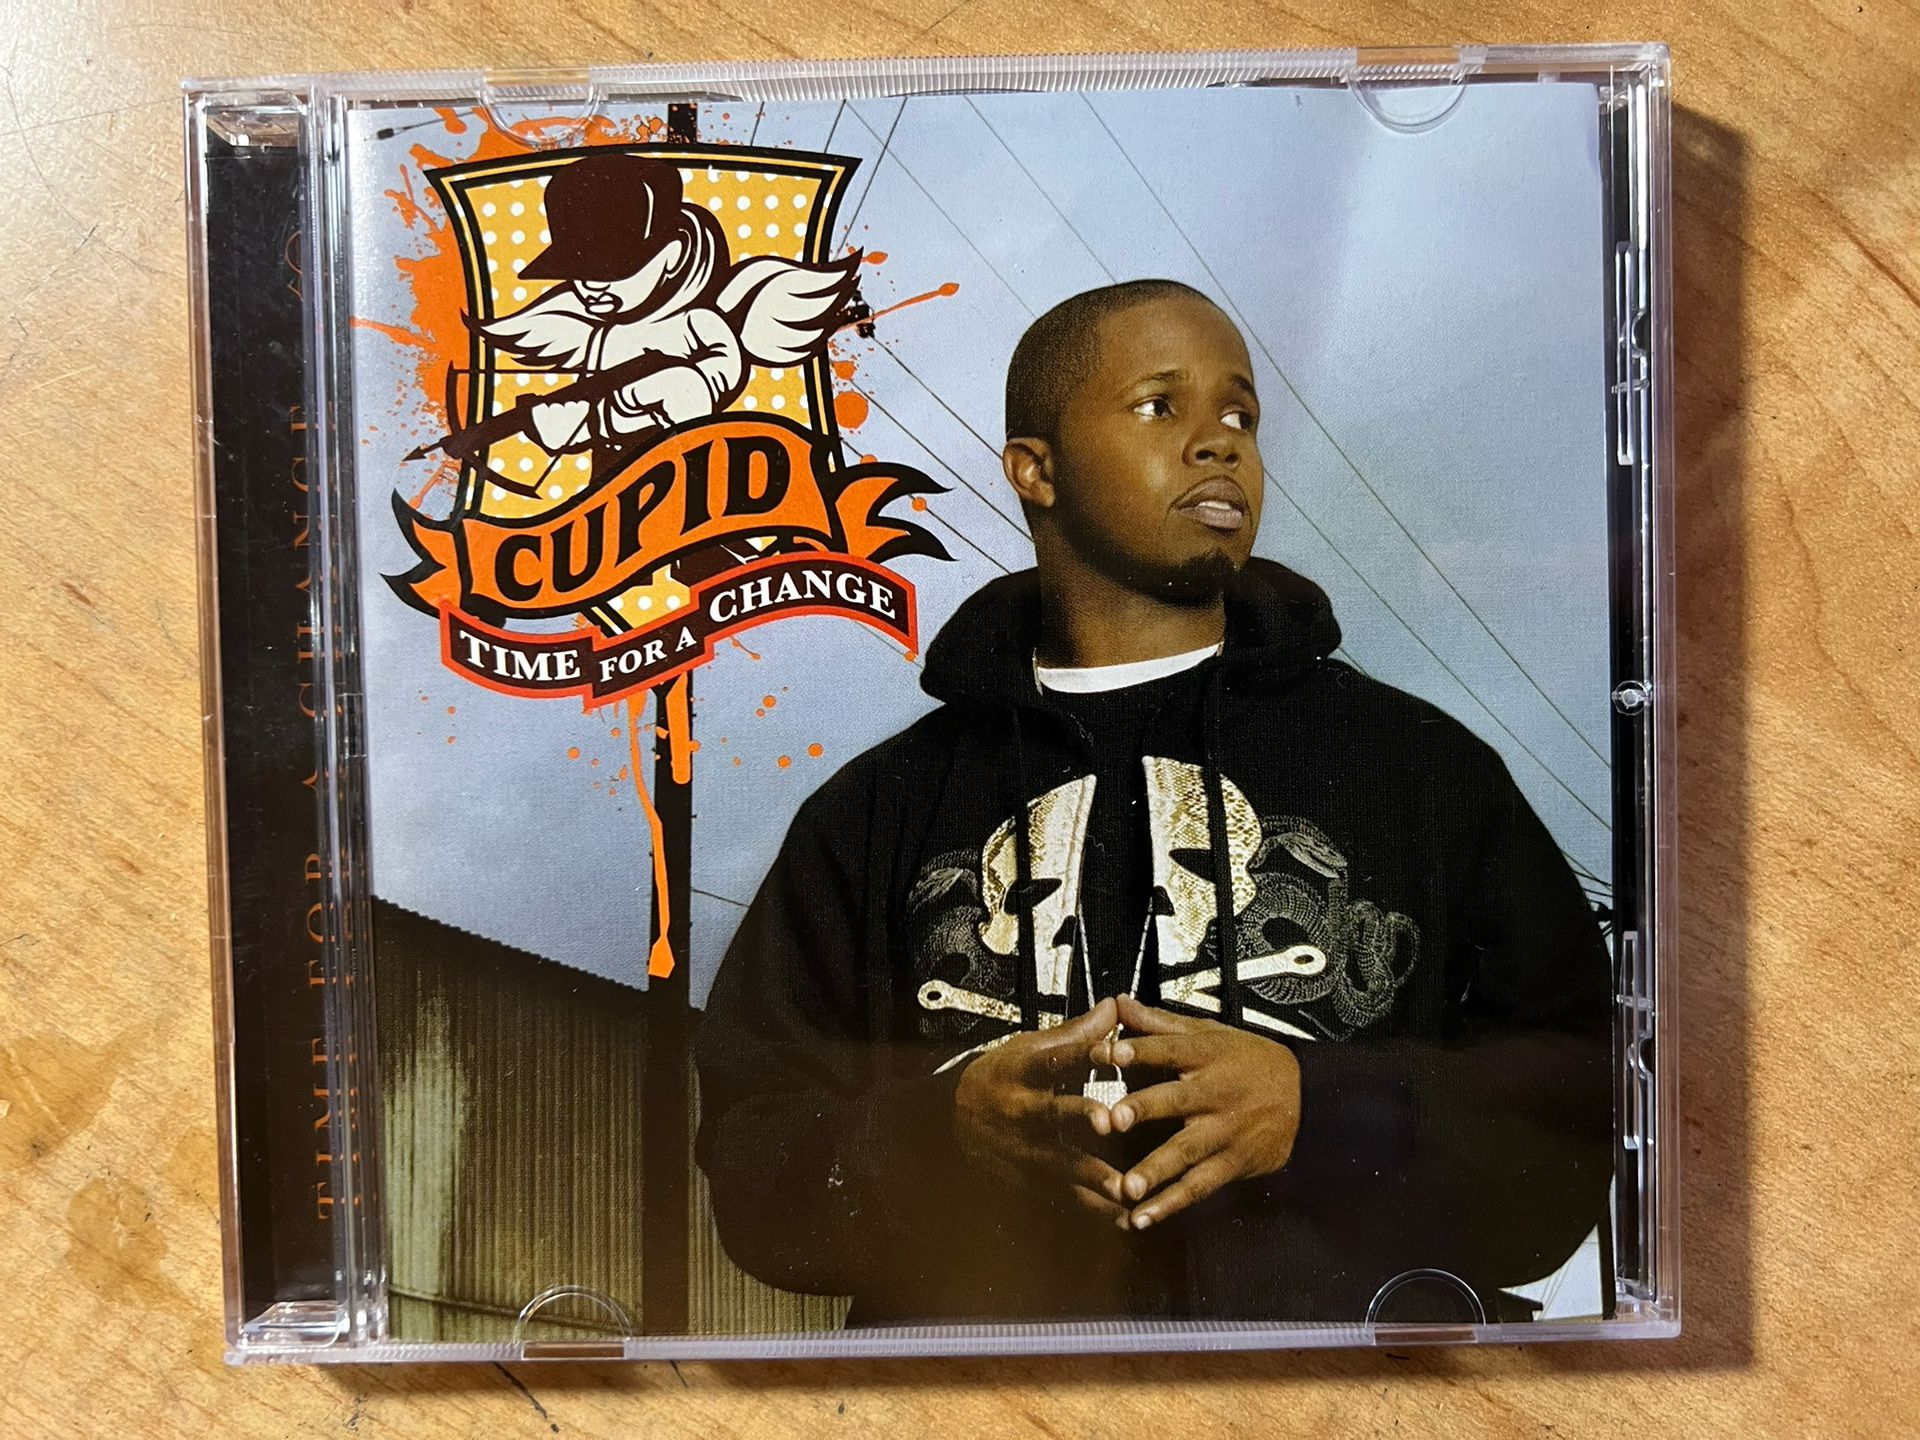 TIME FOR A CHANGE BY CUPID CD R&B HIP HOP FUNK SOUL 2007 ASYLUM